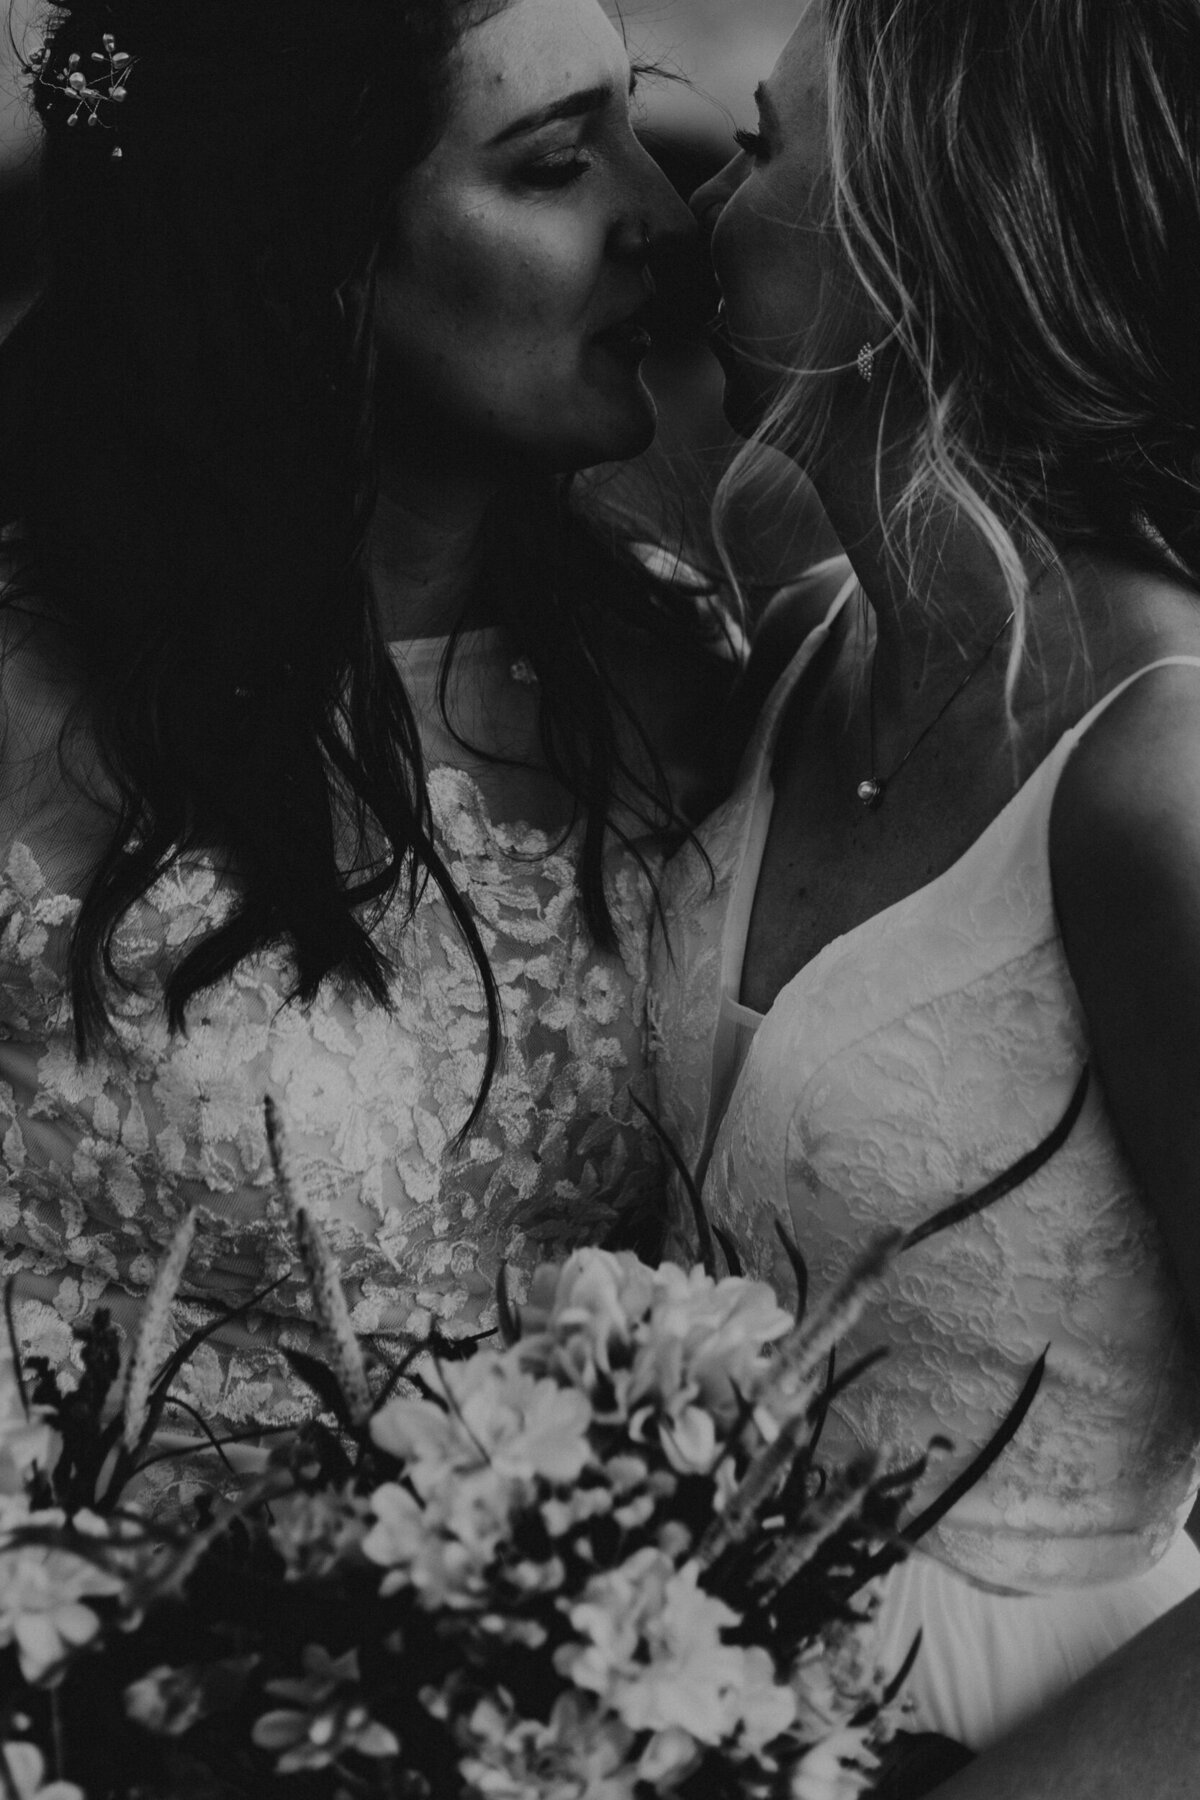 Two newlywed brides holding each other about to kiss